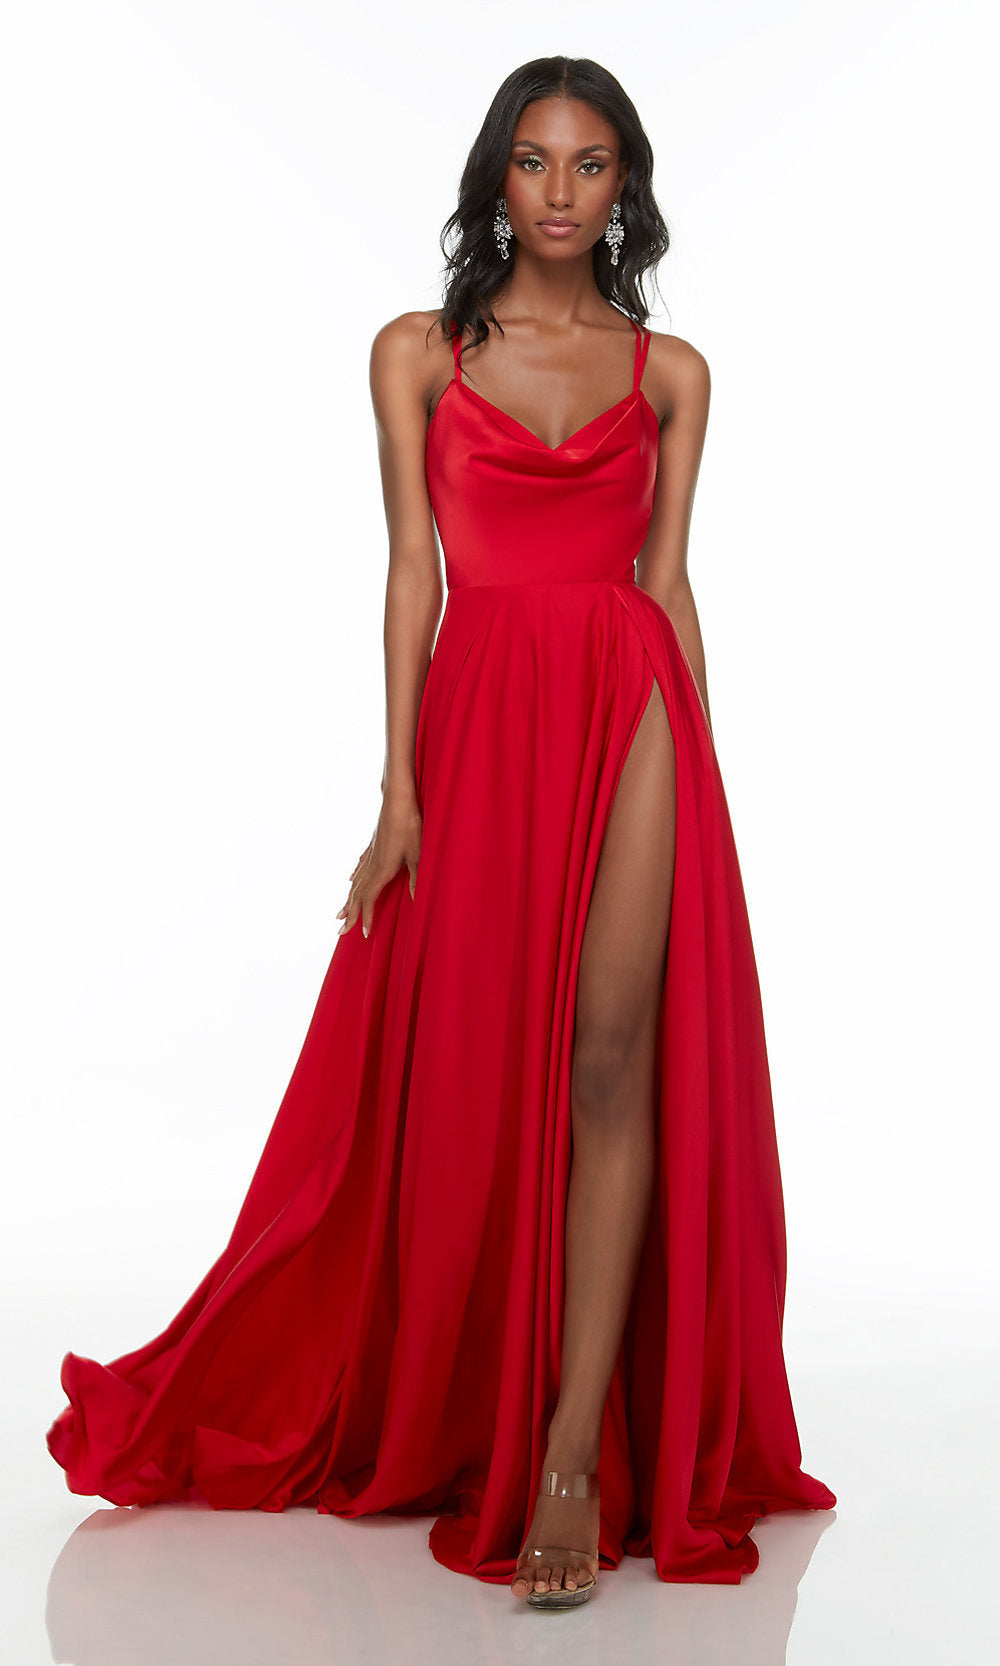 Draped-V-Neck Long Red Prom Dress by